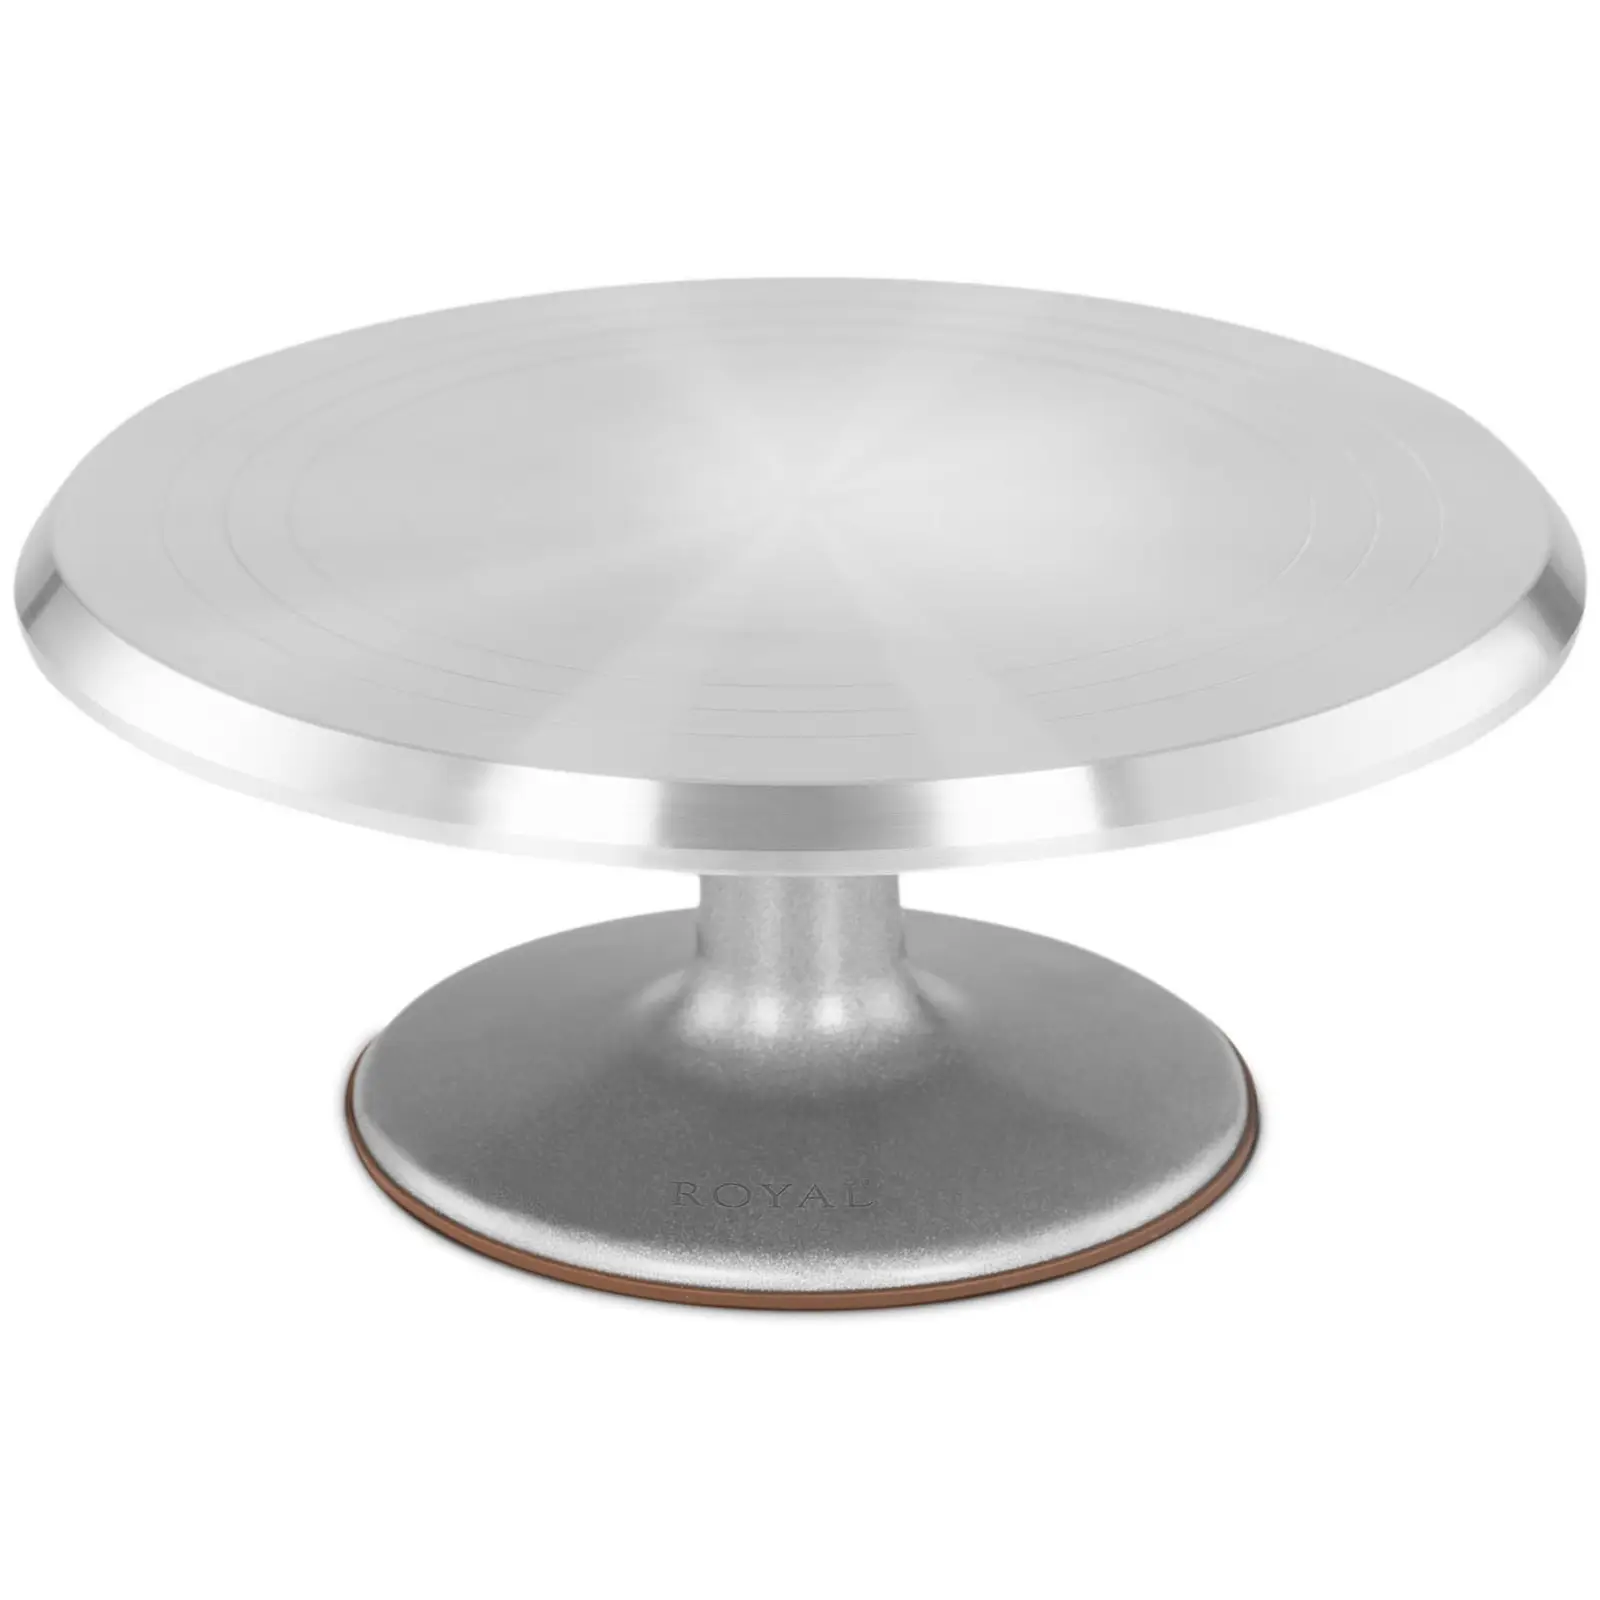 Metal and wooden cake stands	